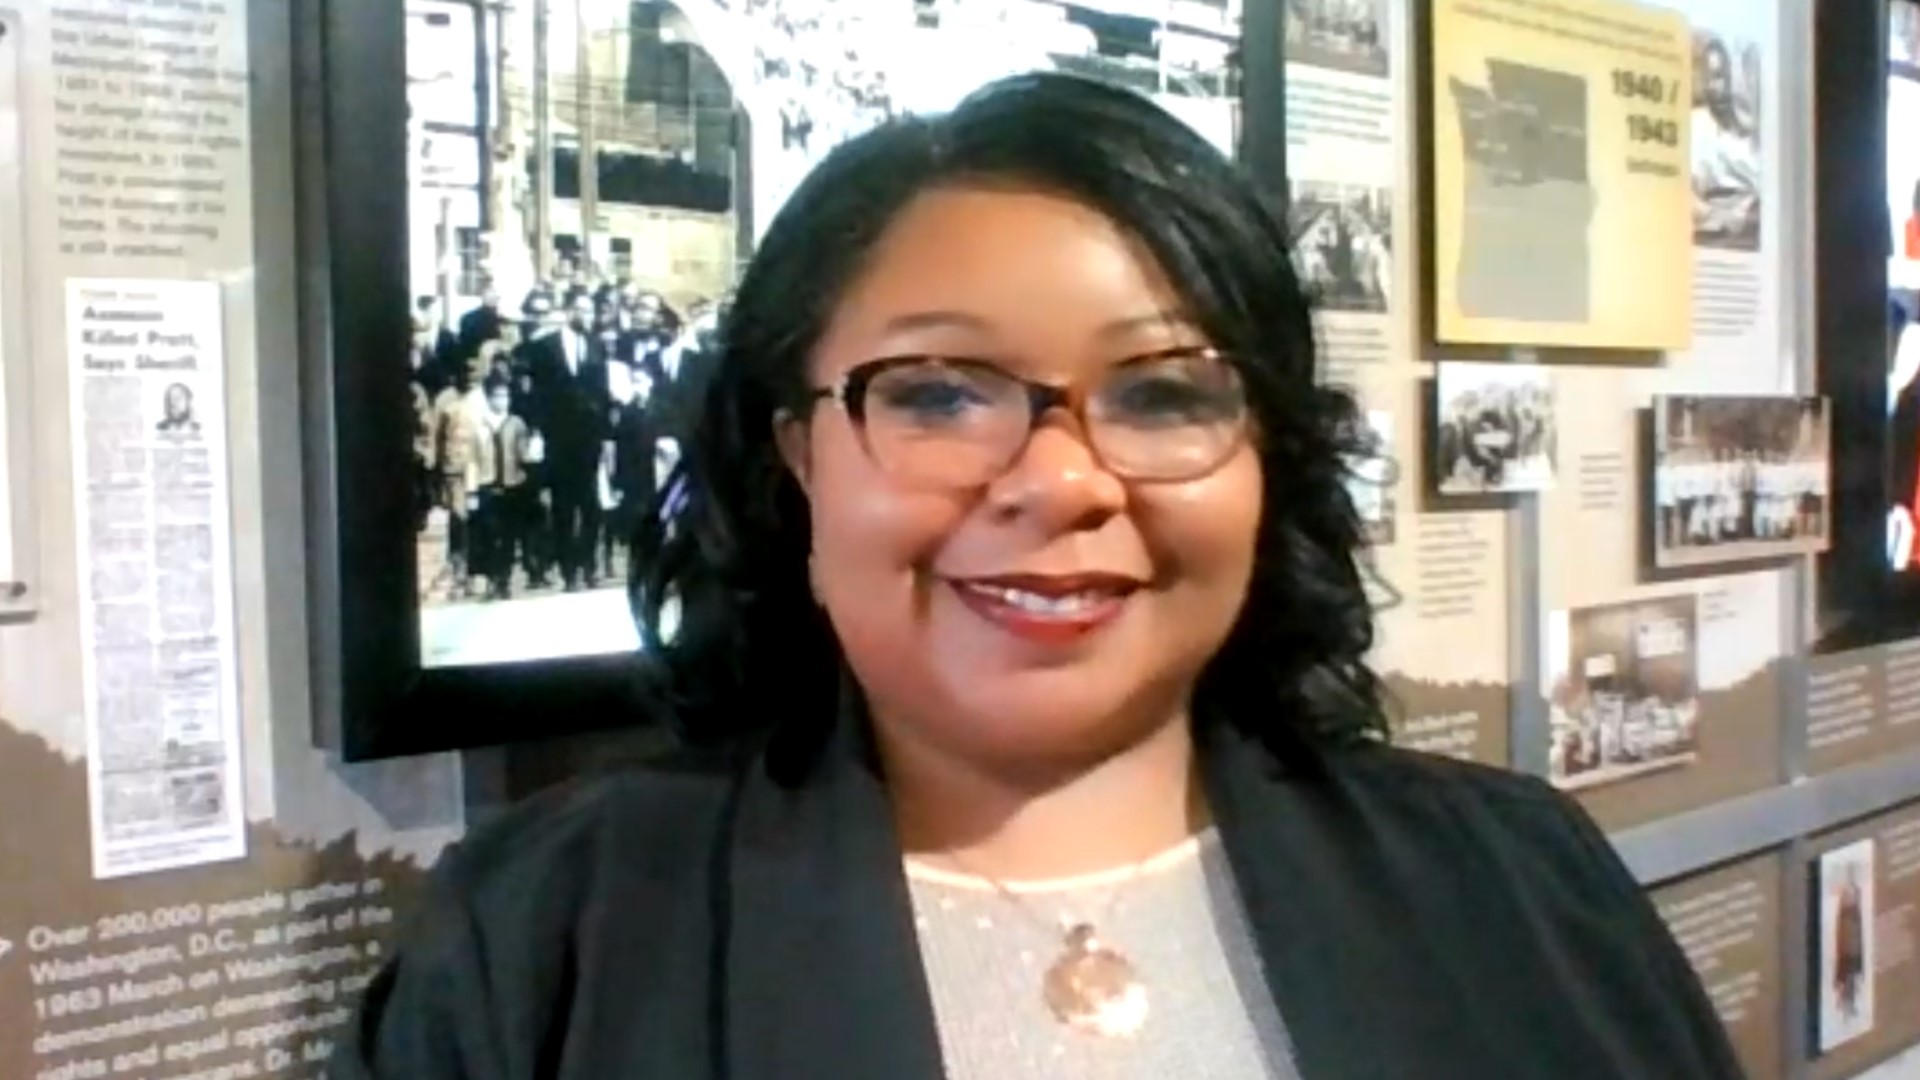 New Day NW spoke with Lanesha Debardelaben, CEO of Northwest African American Museum, about upcoming events. #newdaynw